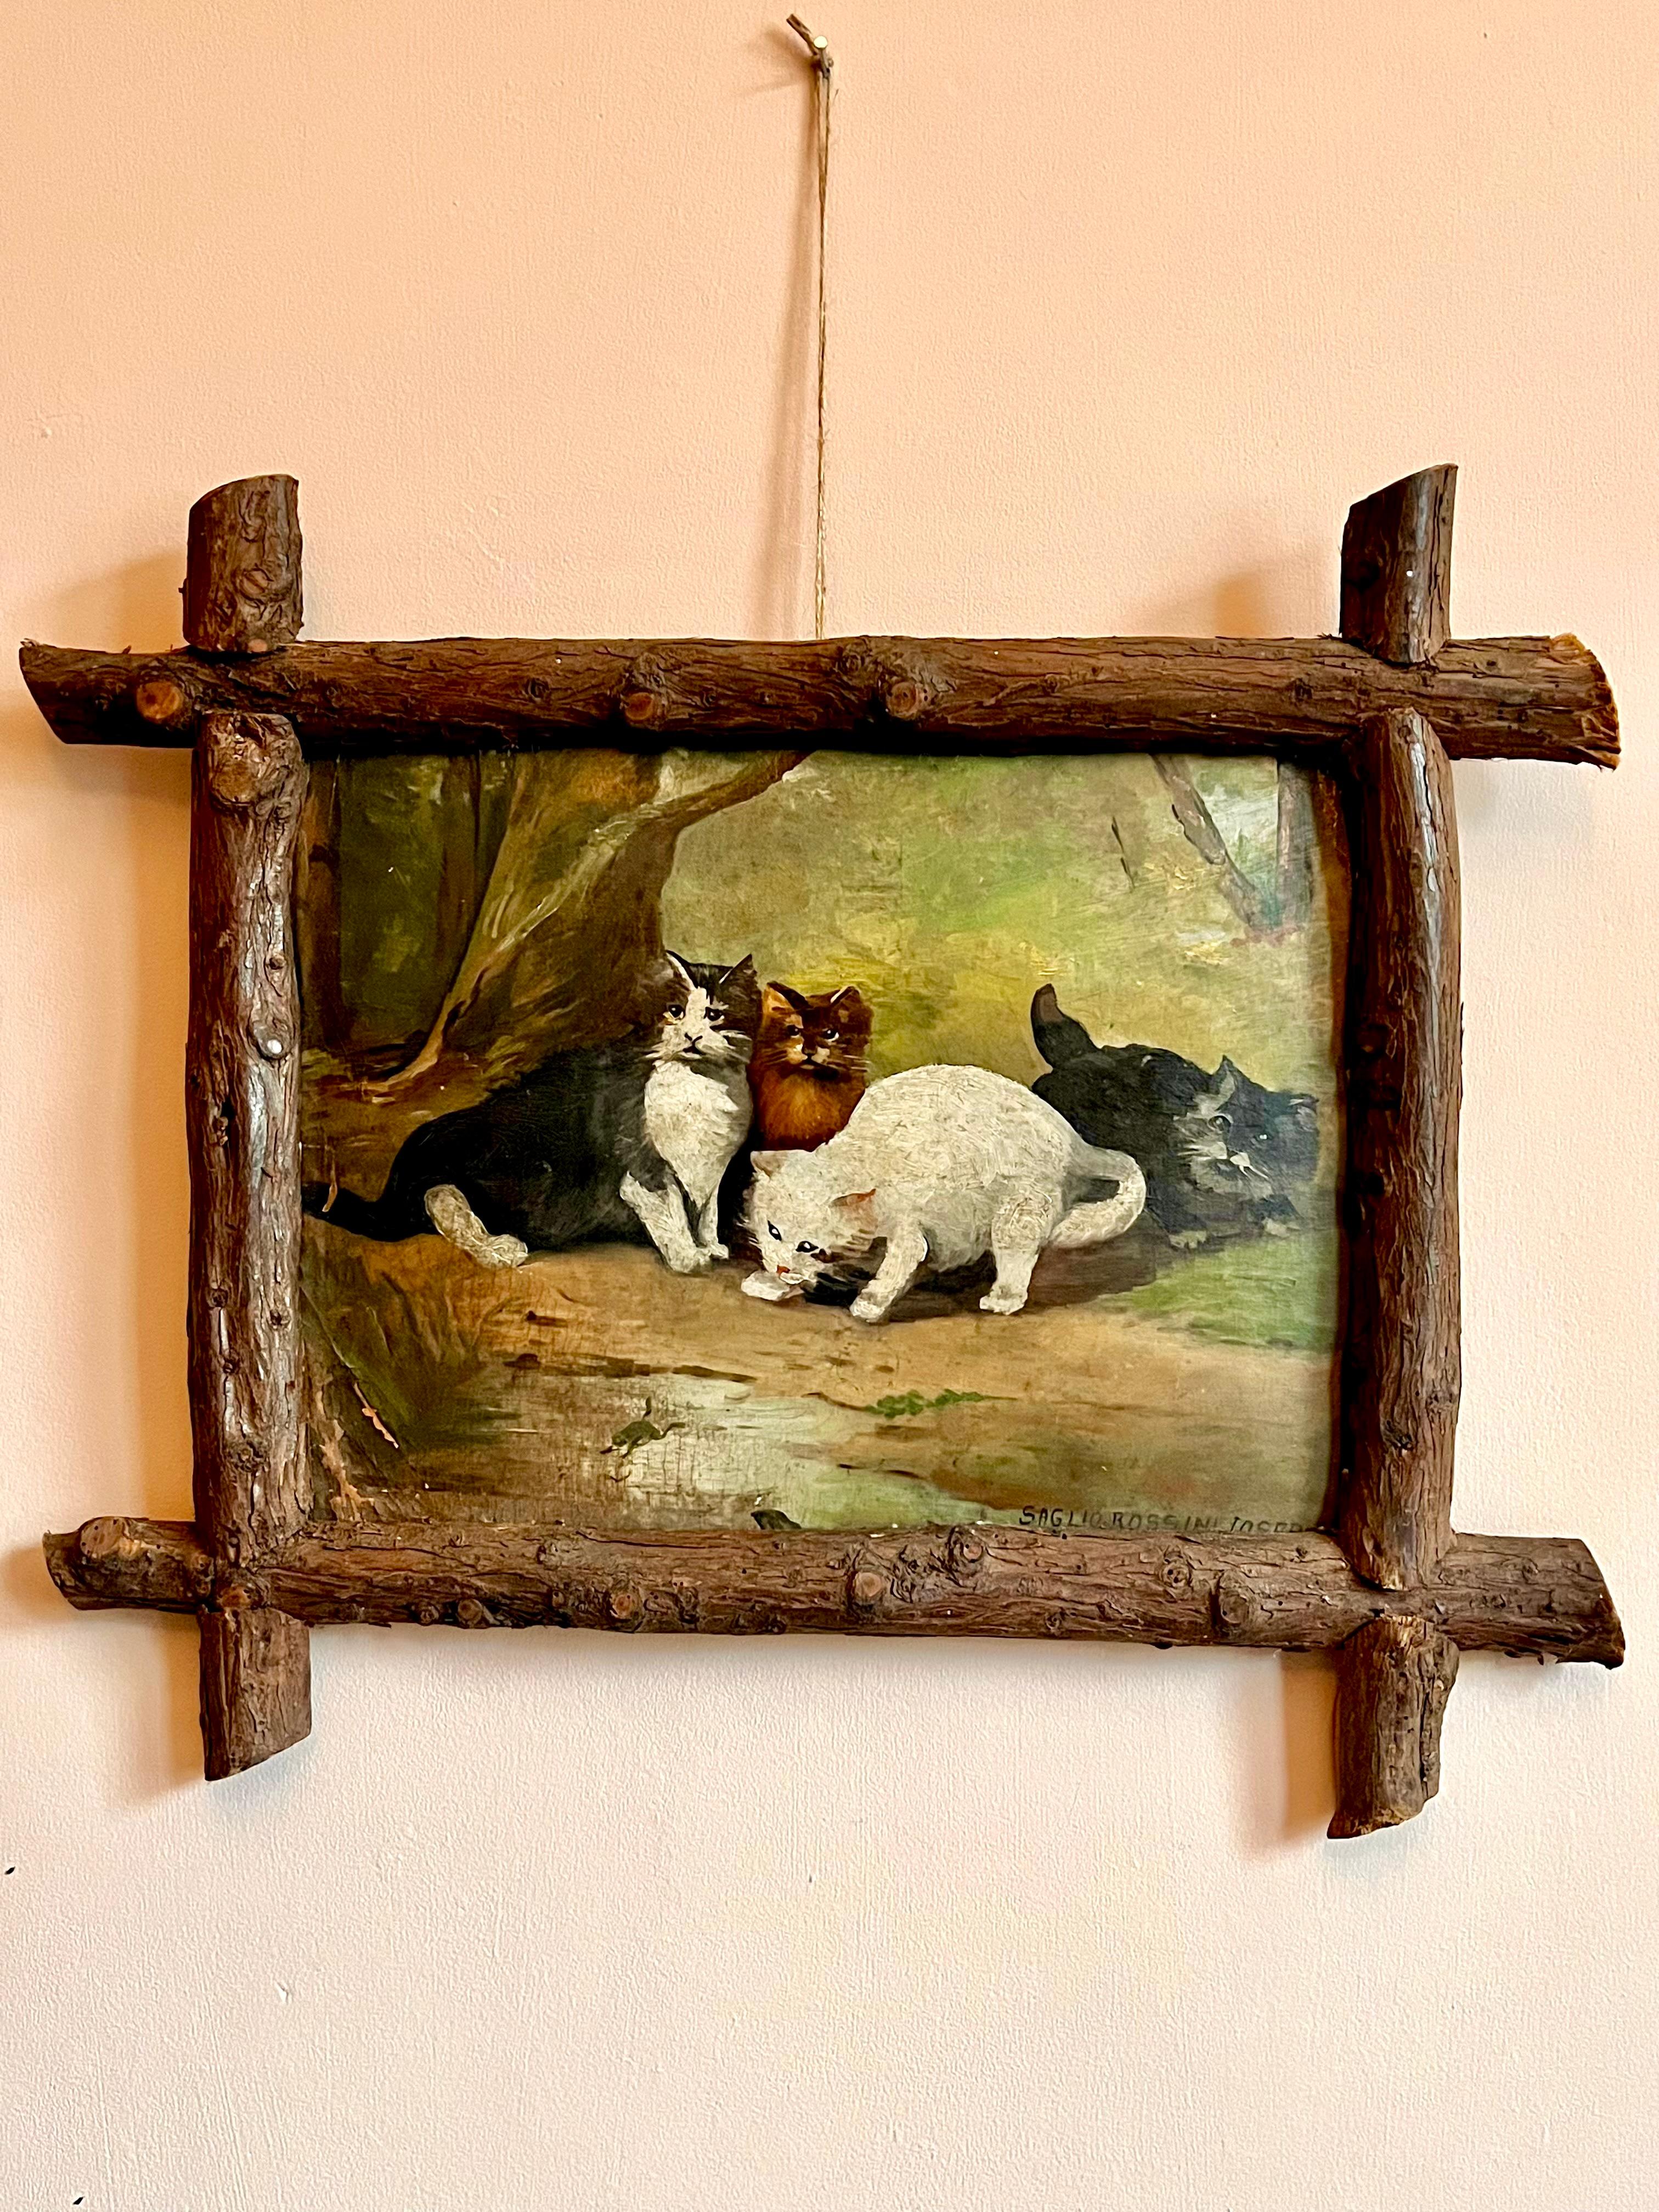 Late C19th Italian oil on board cat painting.

Wonderful and rustic scene depicting four cats chasing a frog with folk art style bark frame. Signed Saglio Rossini Joseph. In good condition with some damage to bottom right corner, spots of historic